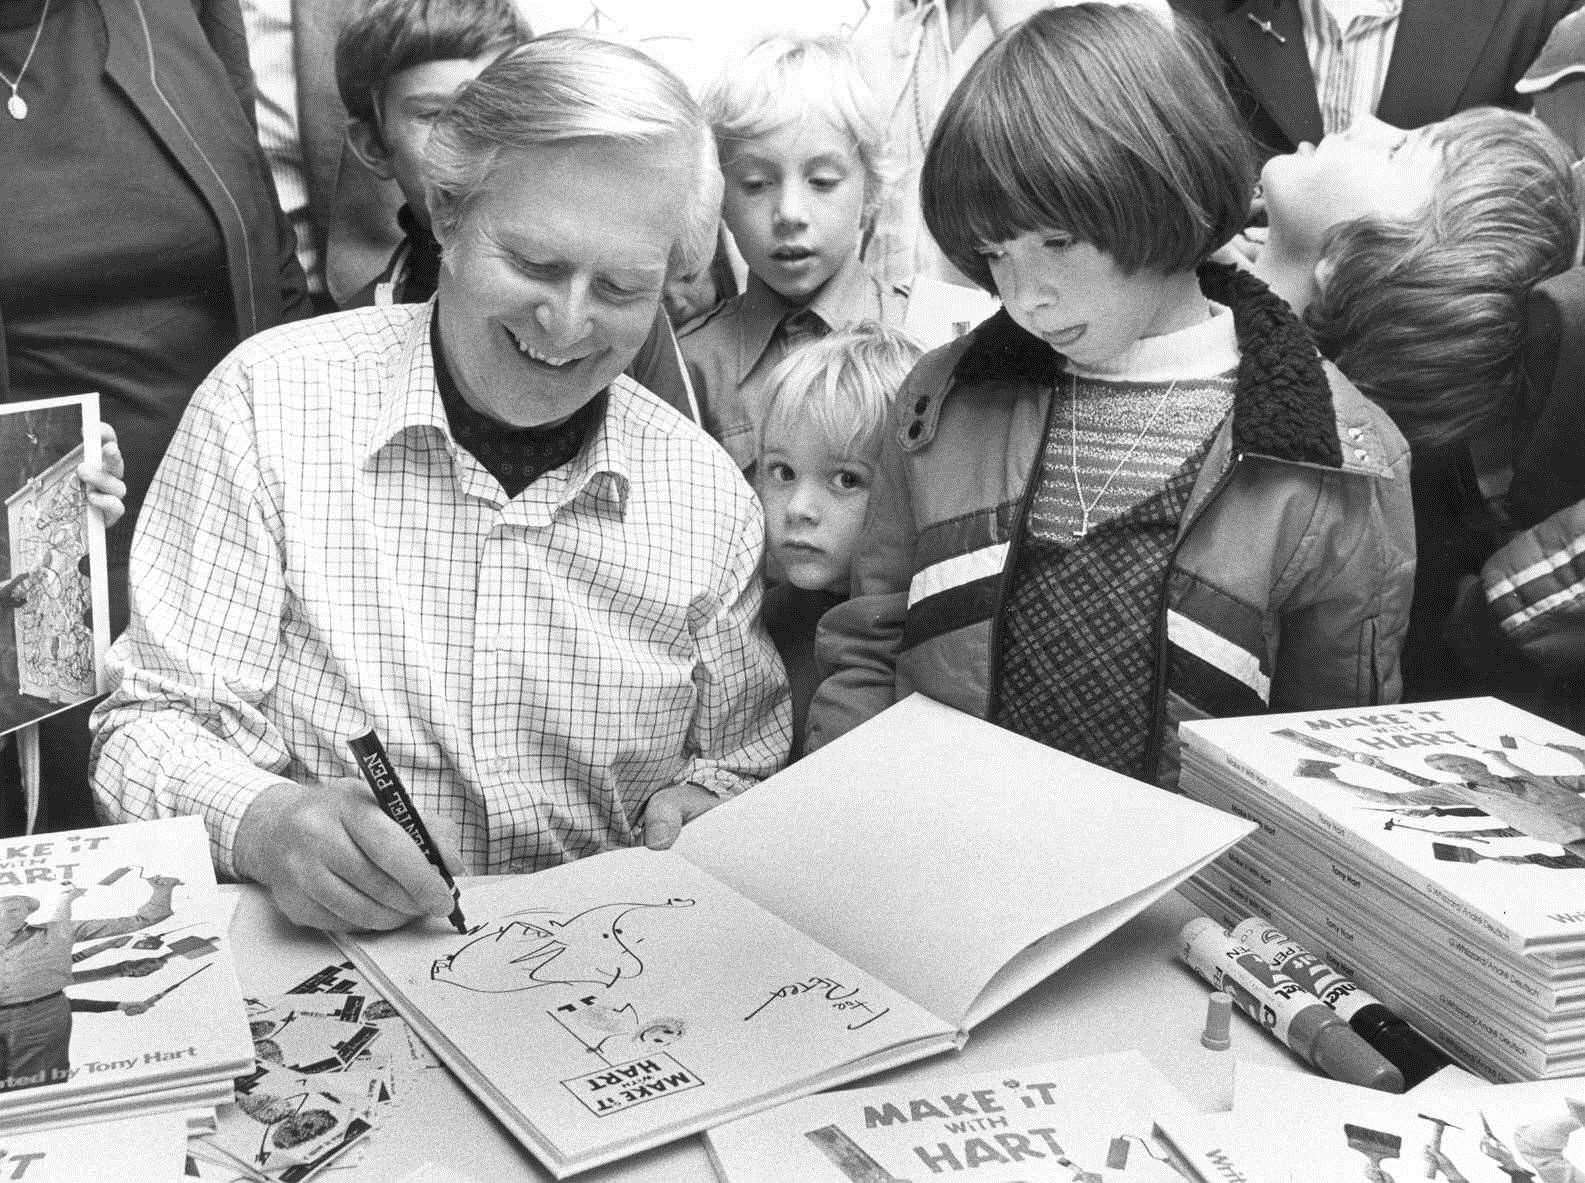 Tony Hart became a popular children's TV presenter. This photo is from 1979